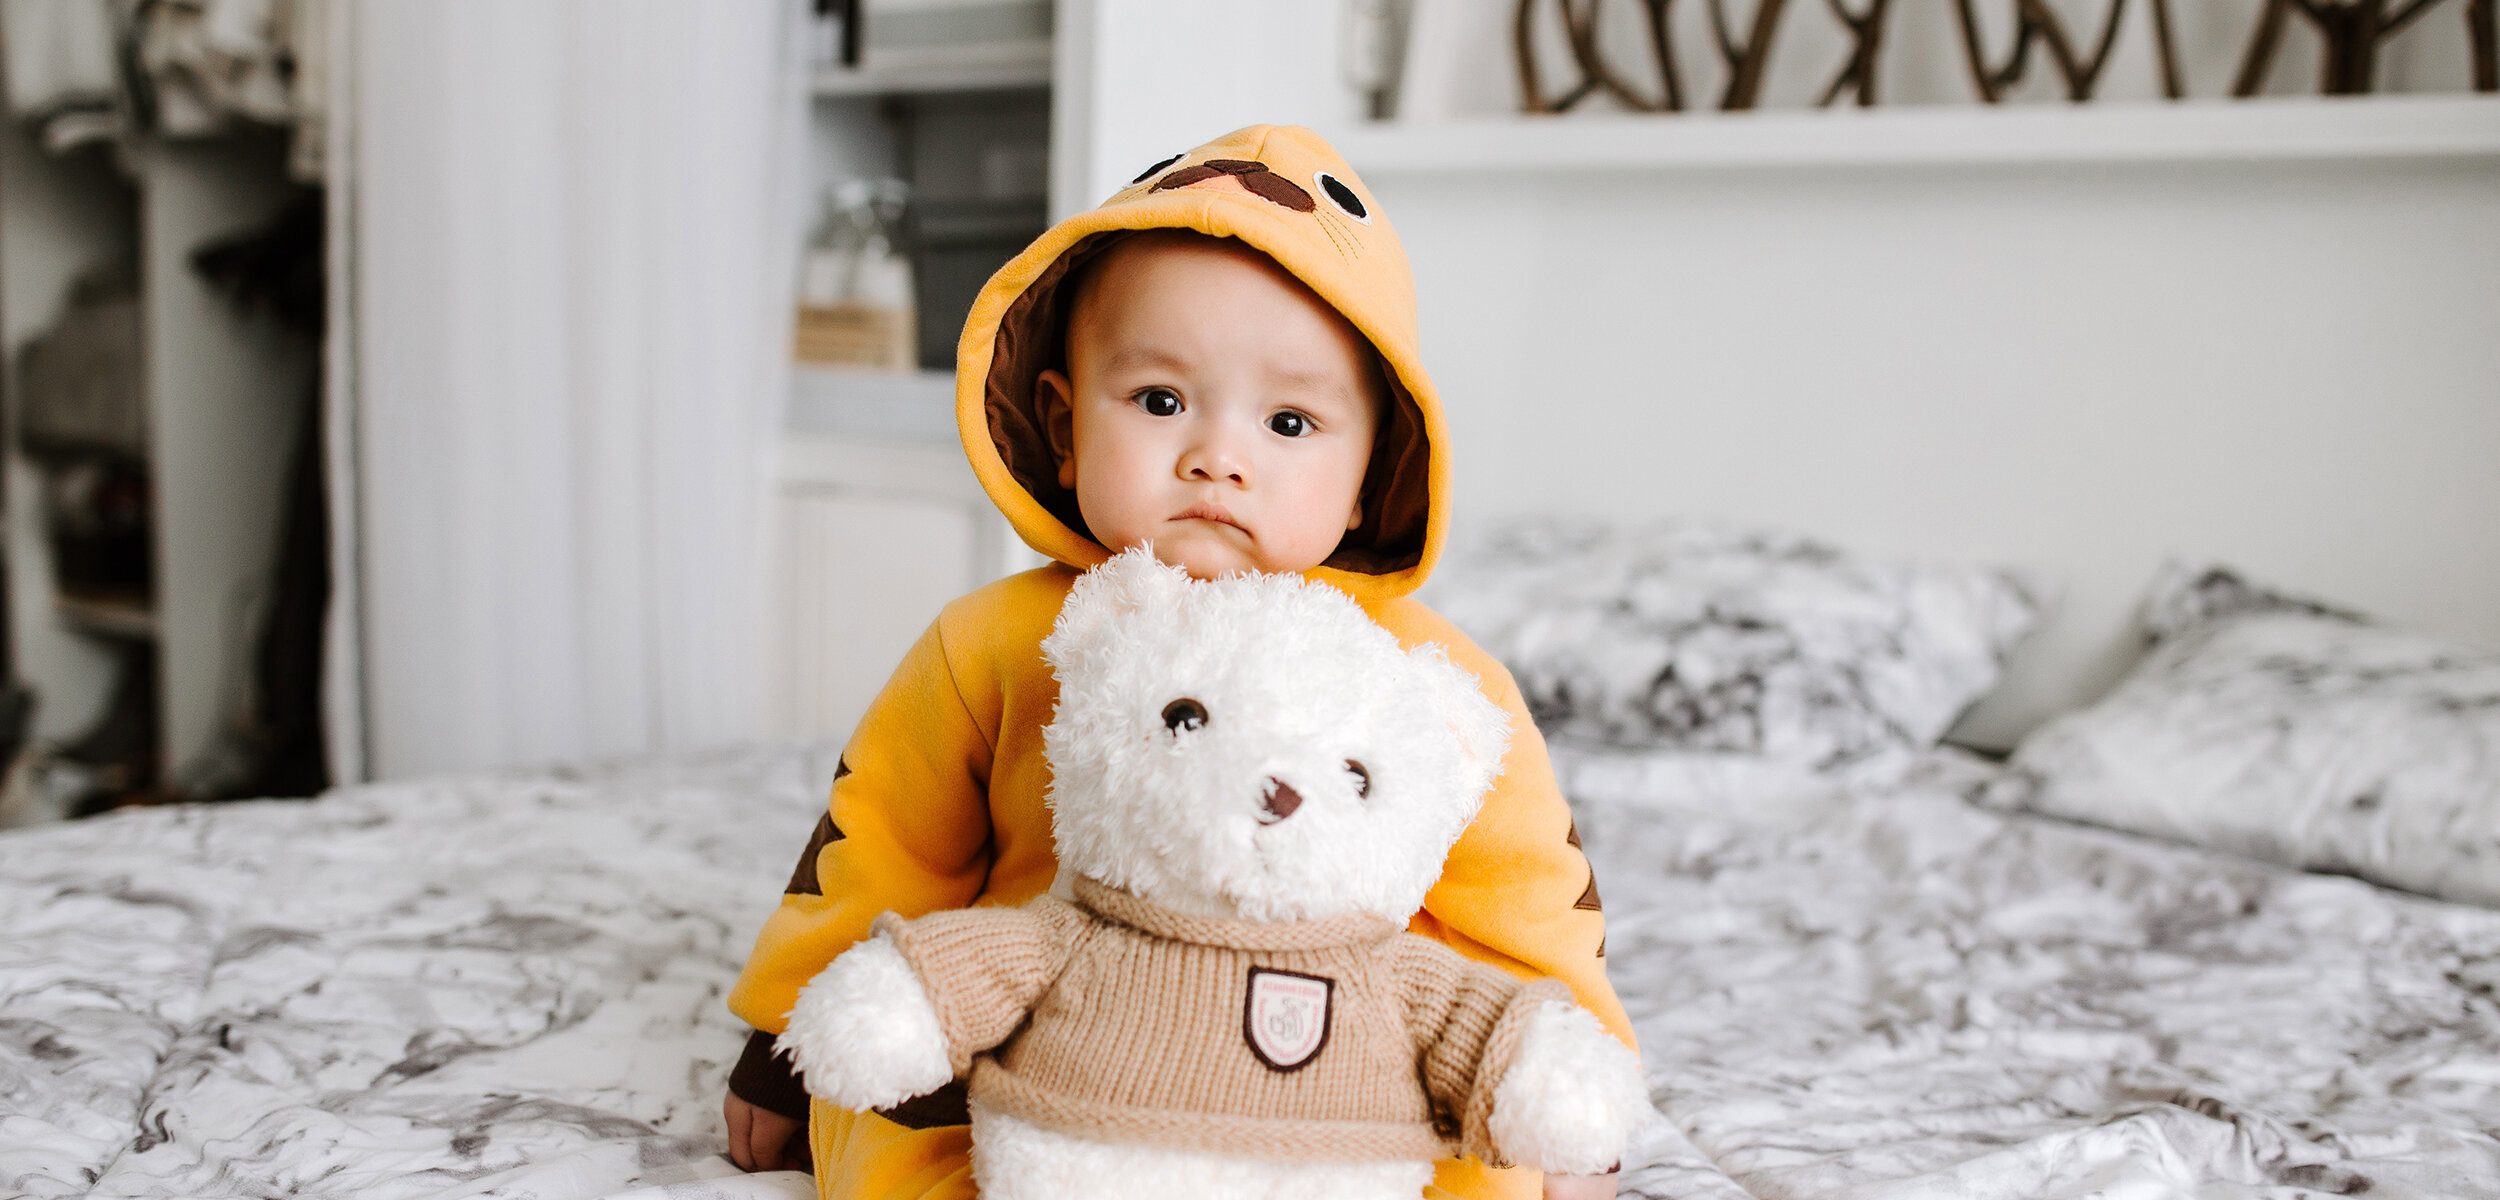 Gorgeous baby in soft yellow clothes hugging teddy bear on bed